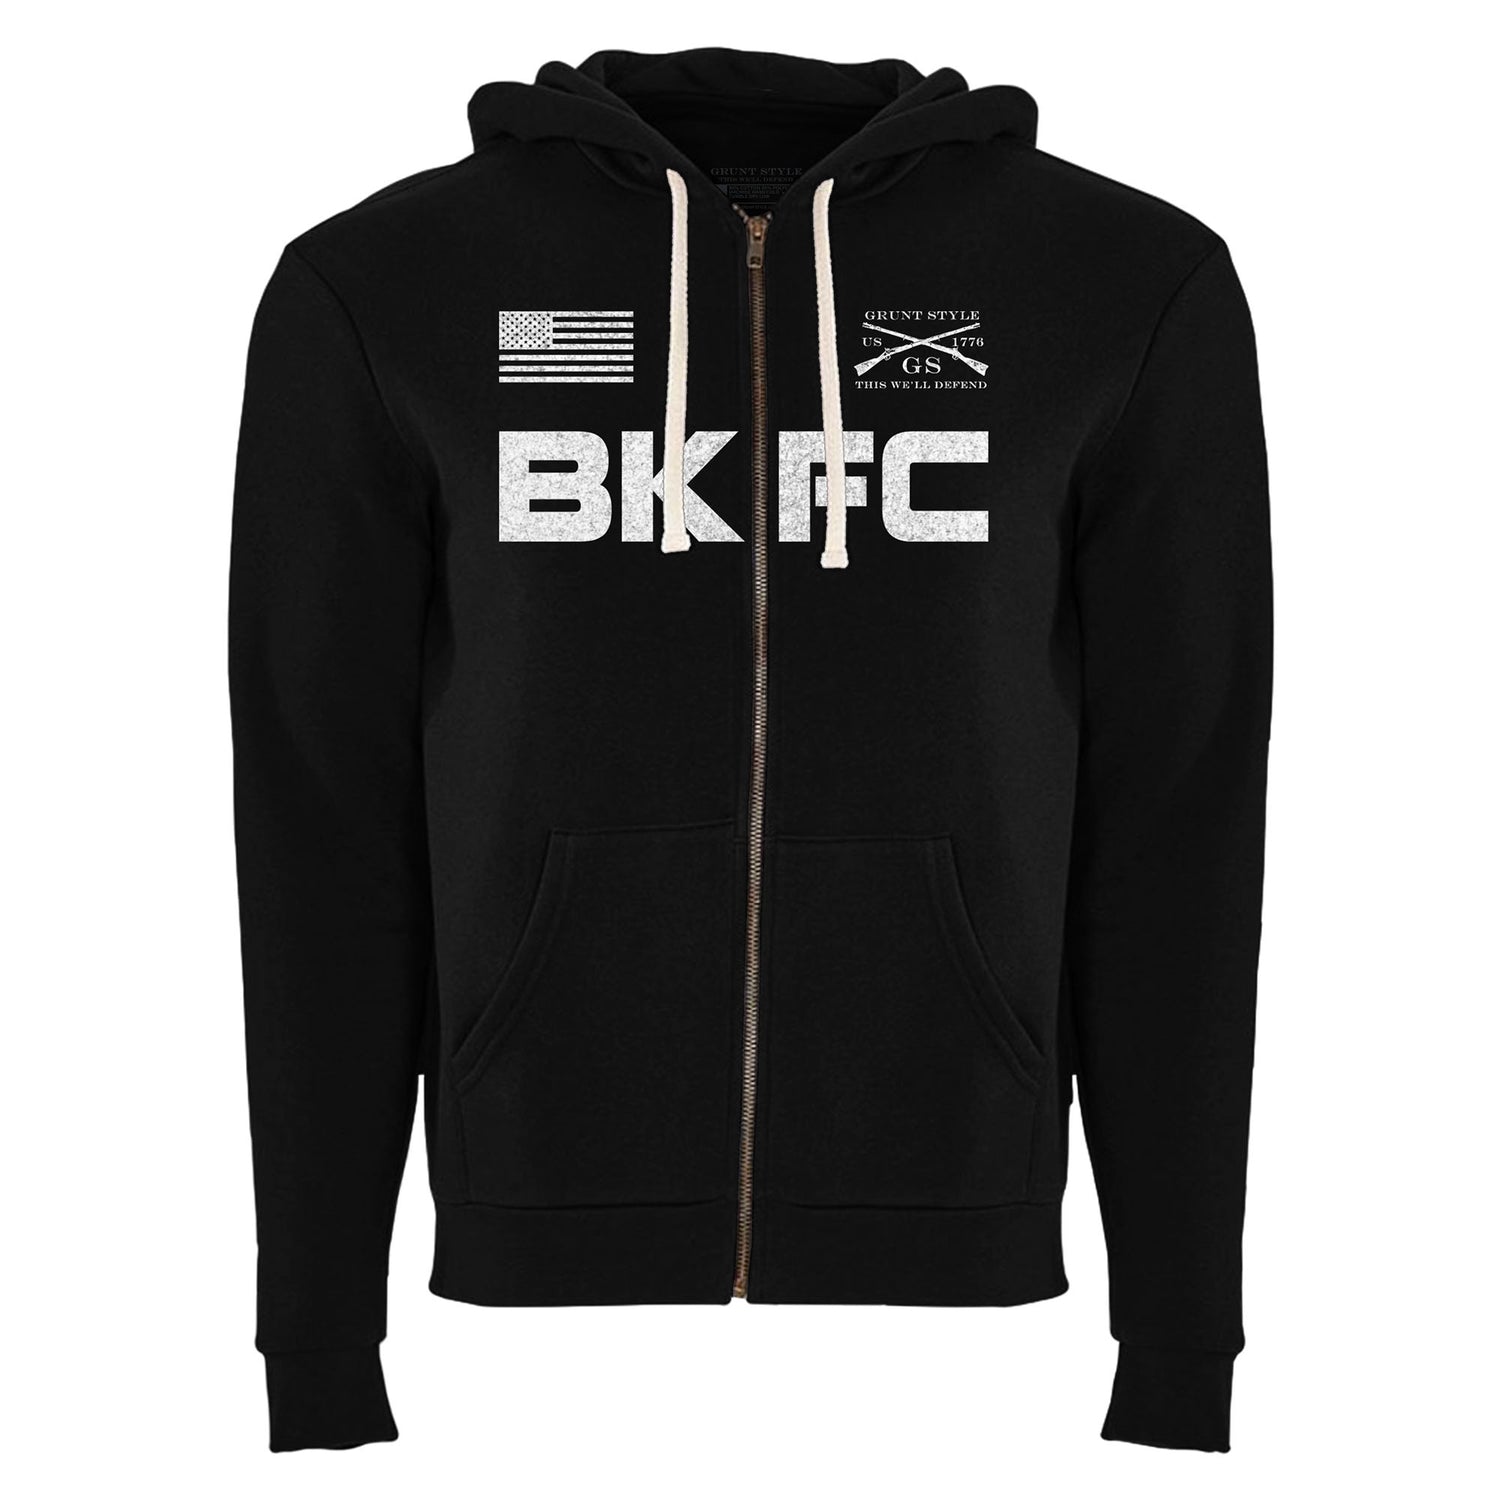 Bare Knuckle Fighting Championship Hoodie 